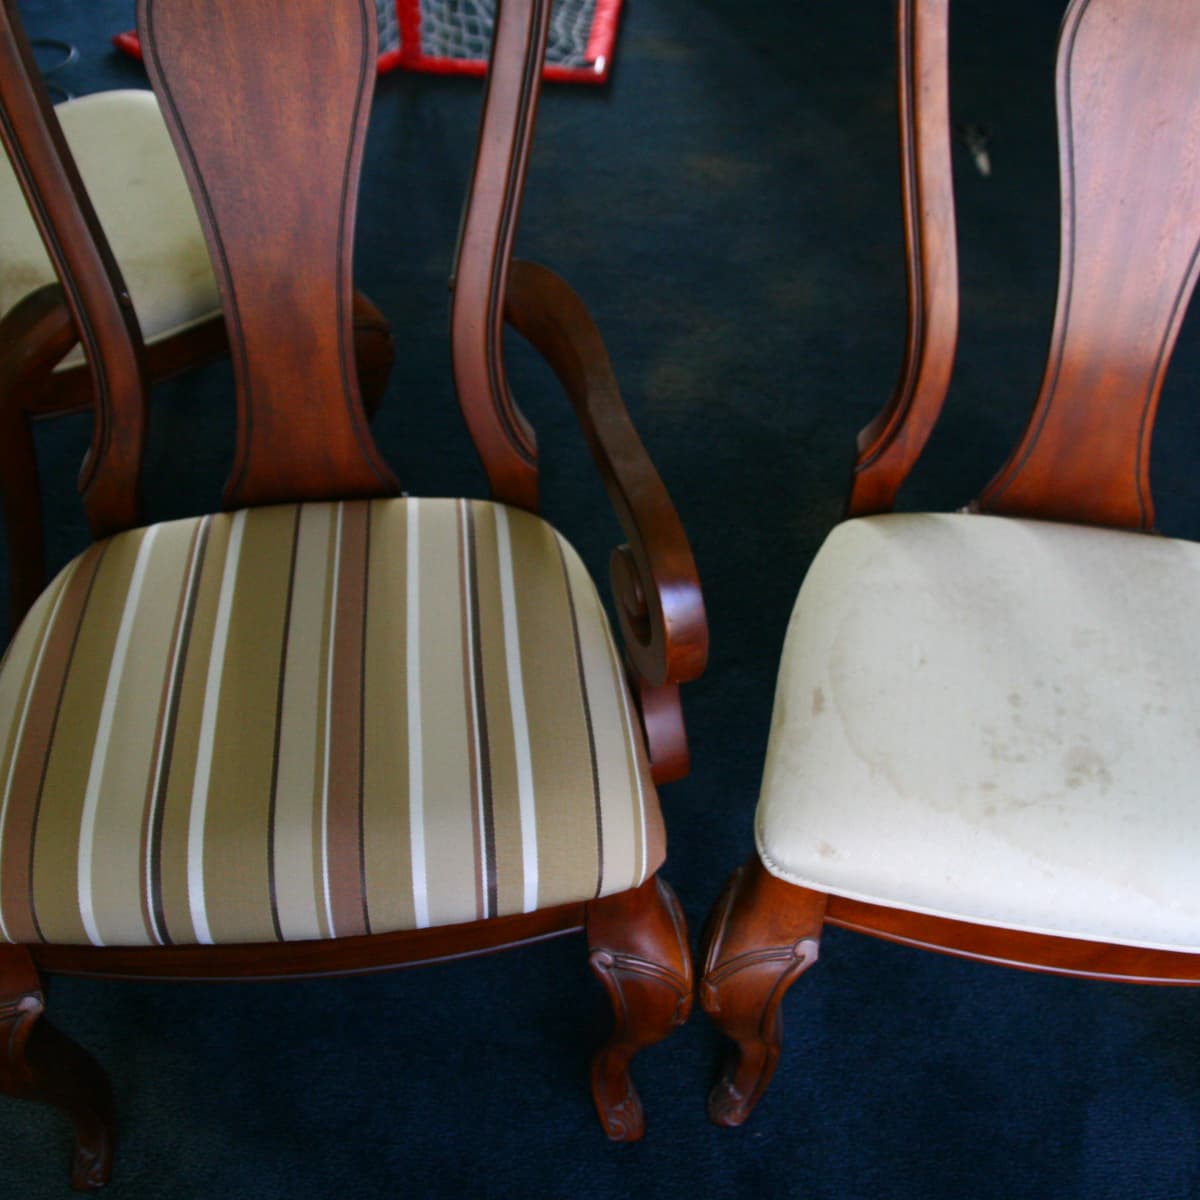 How To Reupholster A Dining Room Chair, How To Recover Leather Dining Chairs With Fabric